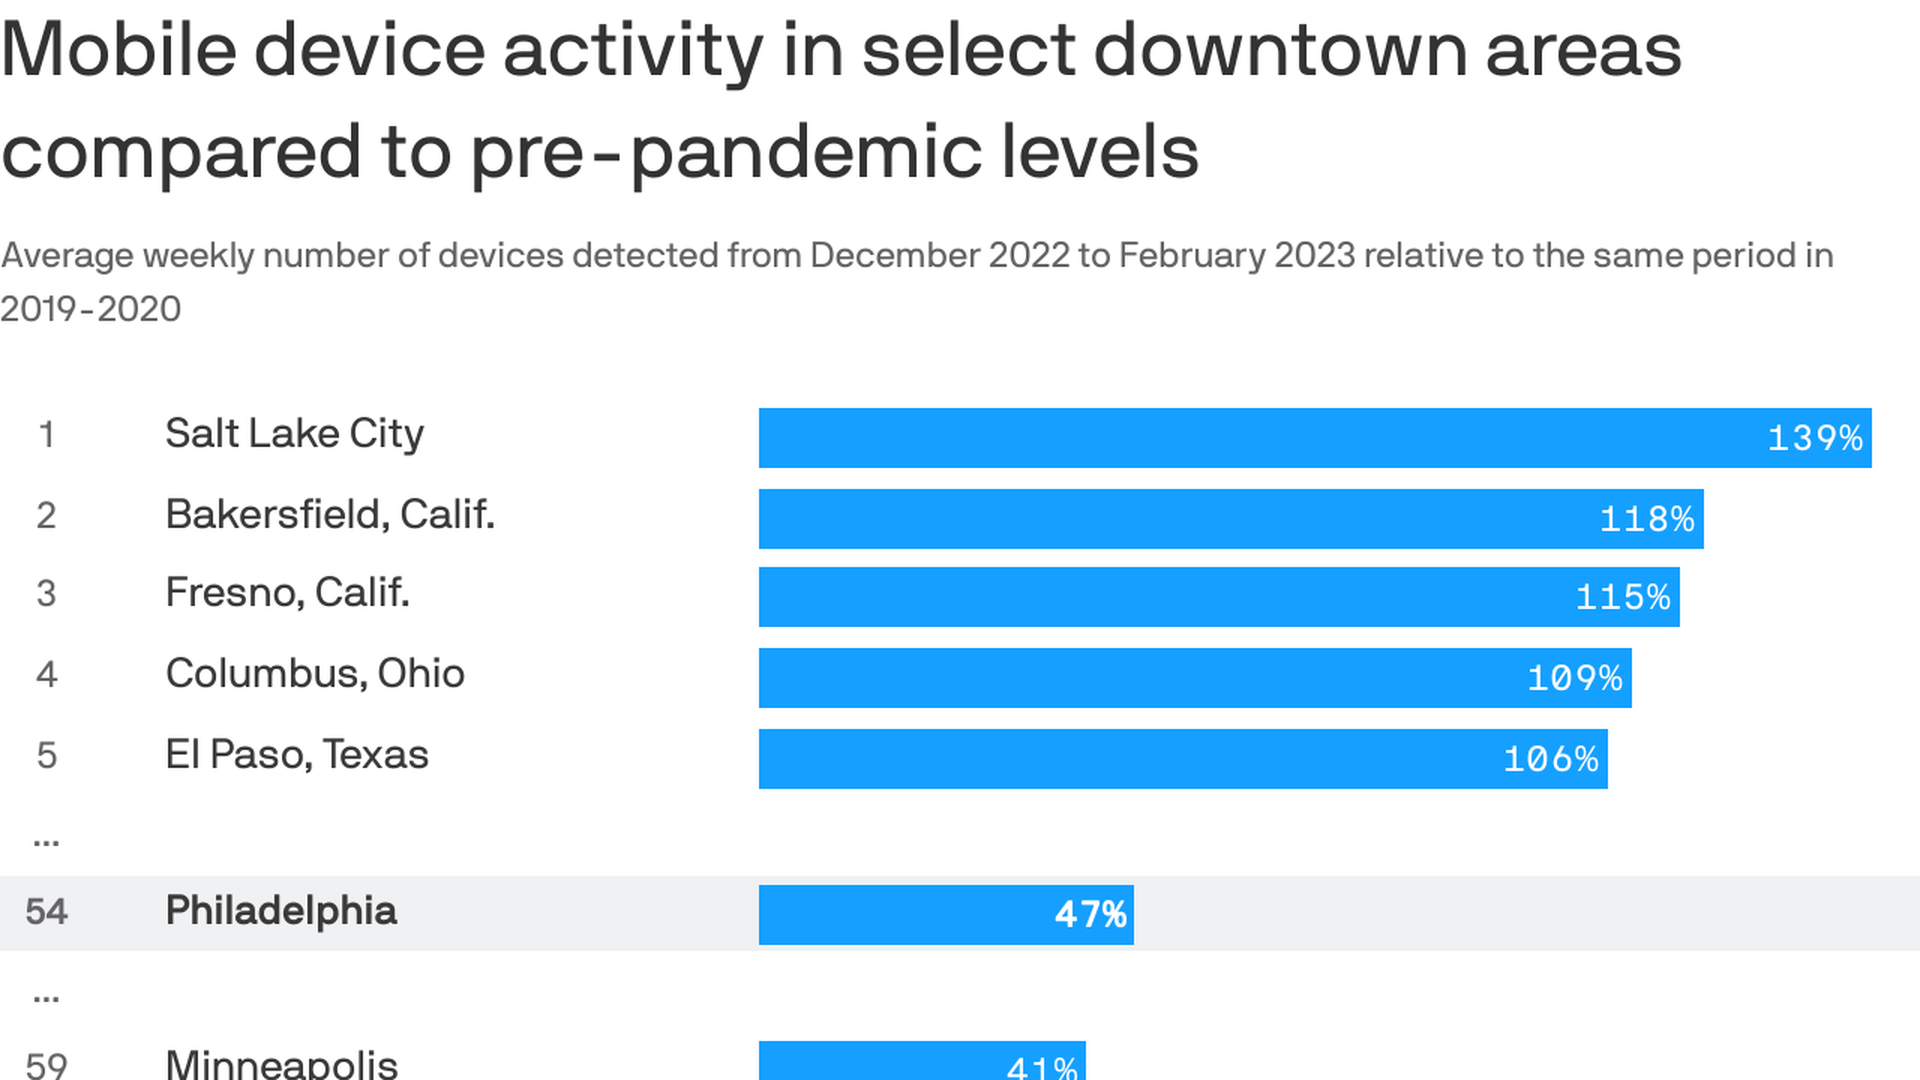 Bar chart showing mobile device activity has surpassed pre pandemic levels in Salt Lake City, Bakersfield and Fresno California, but only reached 47% of pre pandemic level in Philadelphia.